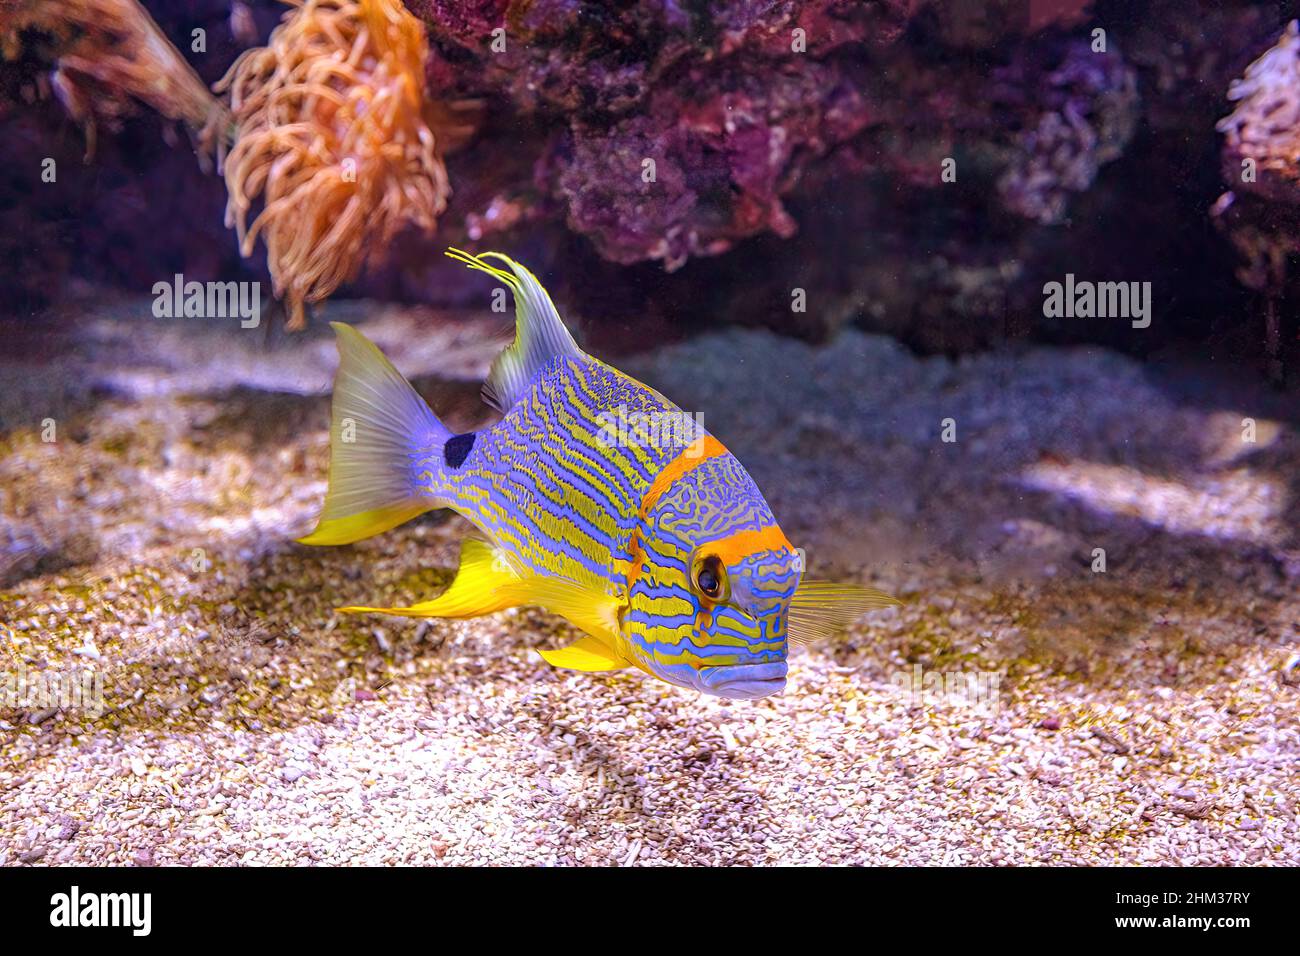 Sailfin snapper fish or blue-lined sea bream in coral reef. Symphorichthys spilurus species living in eastern Indian Ocean and the western Pacific Stock Photo